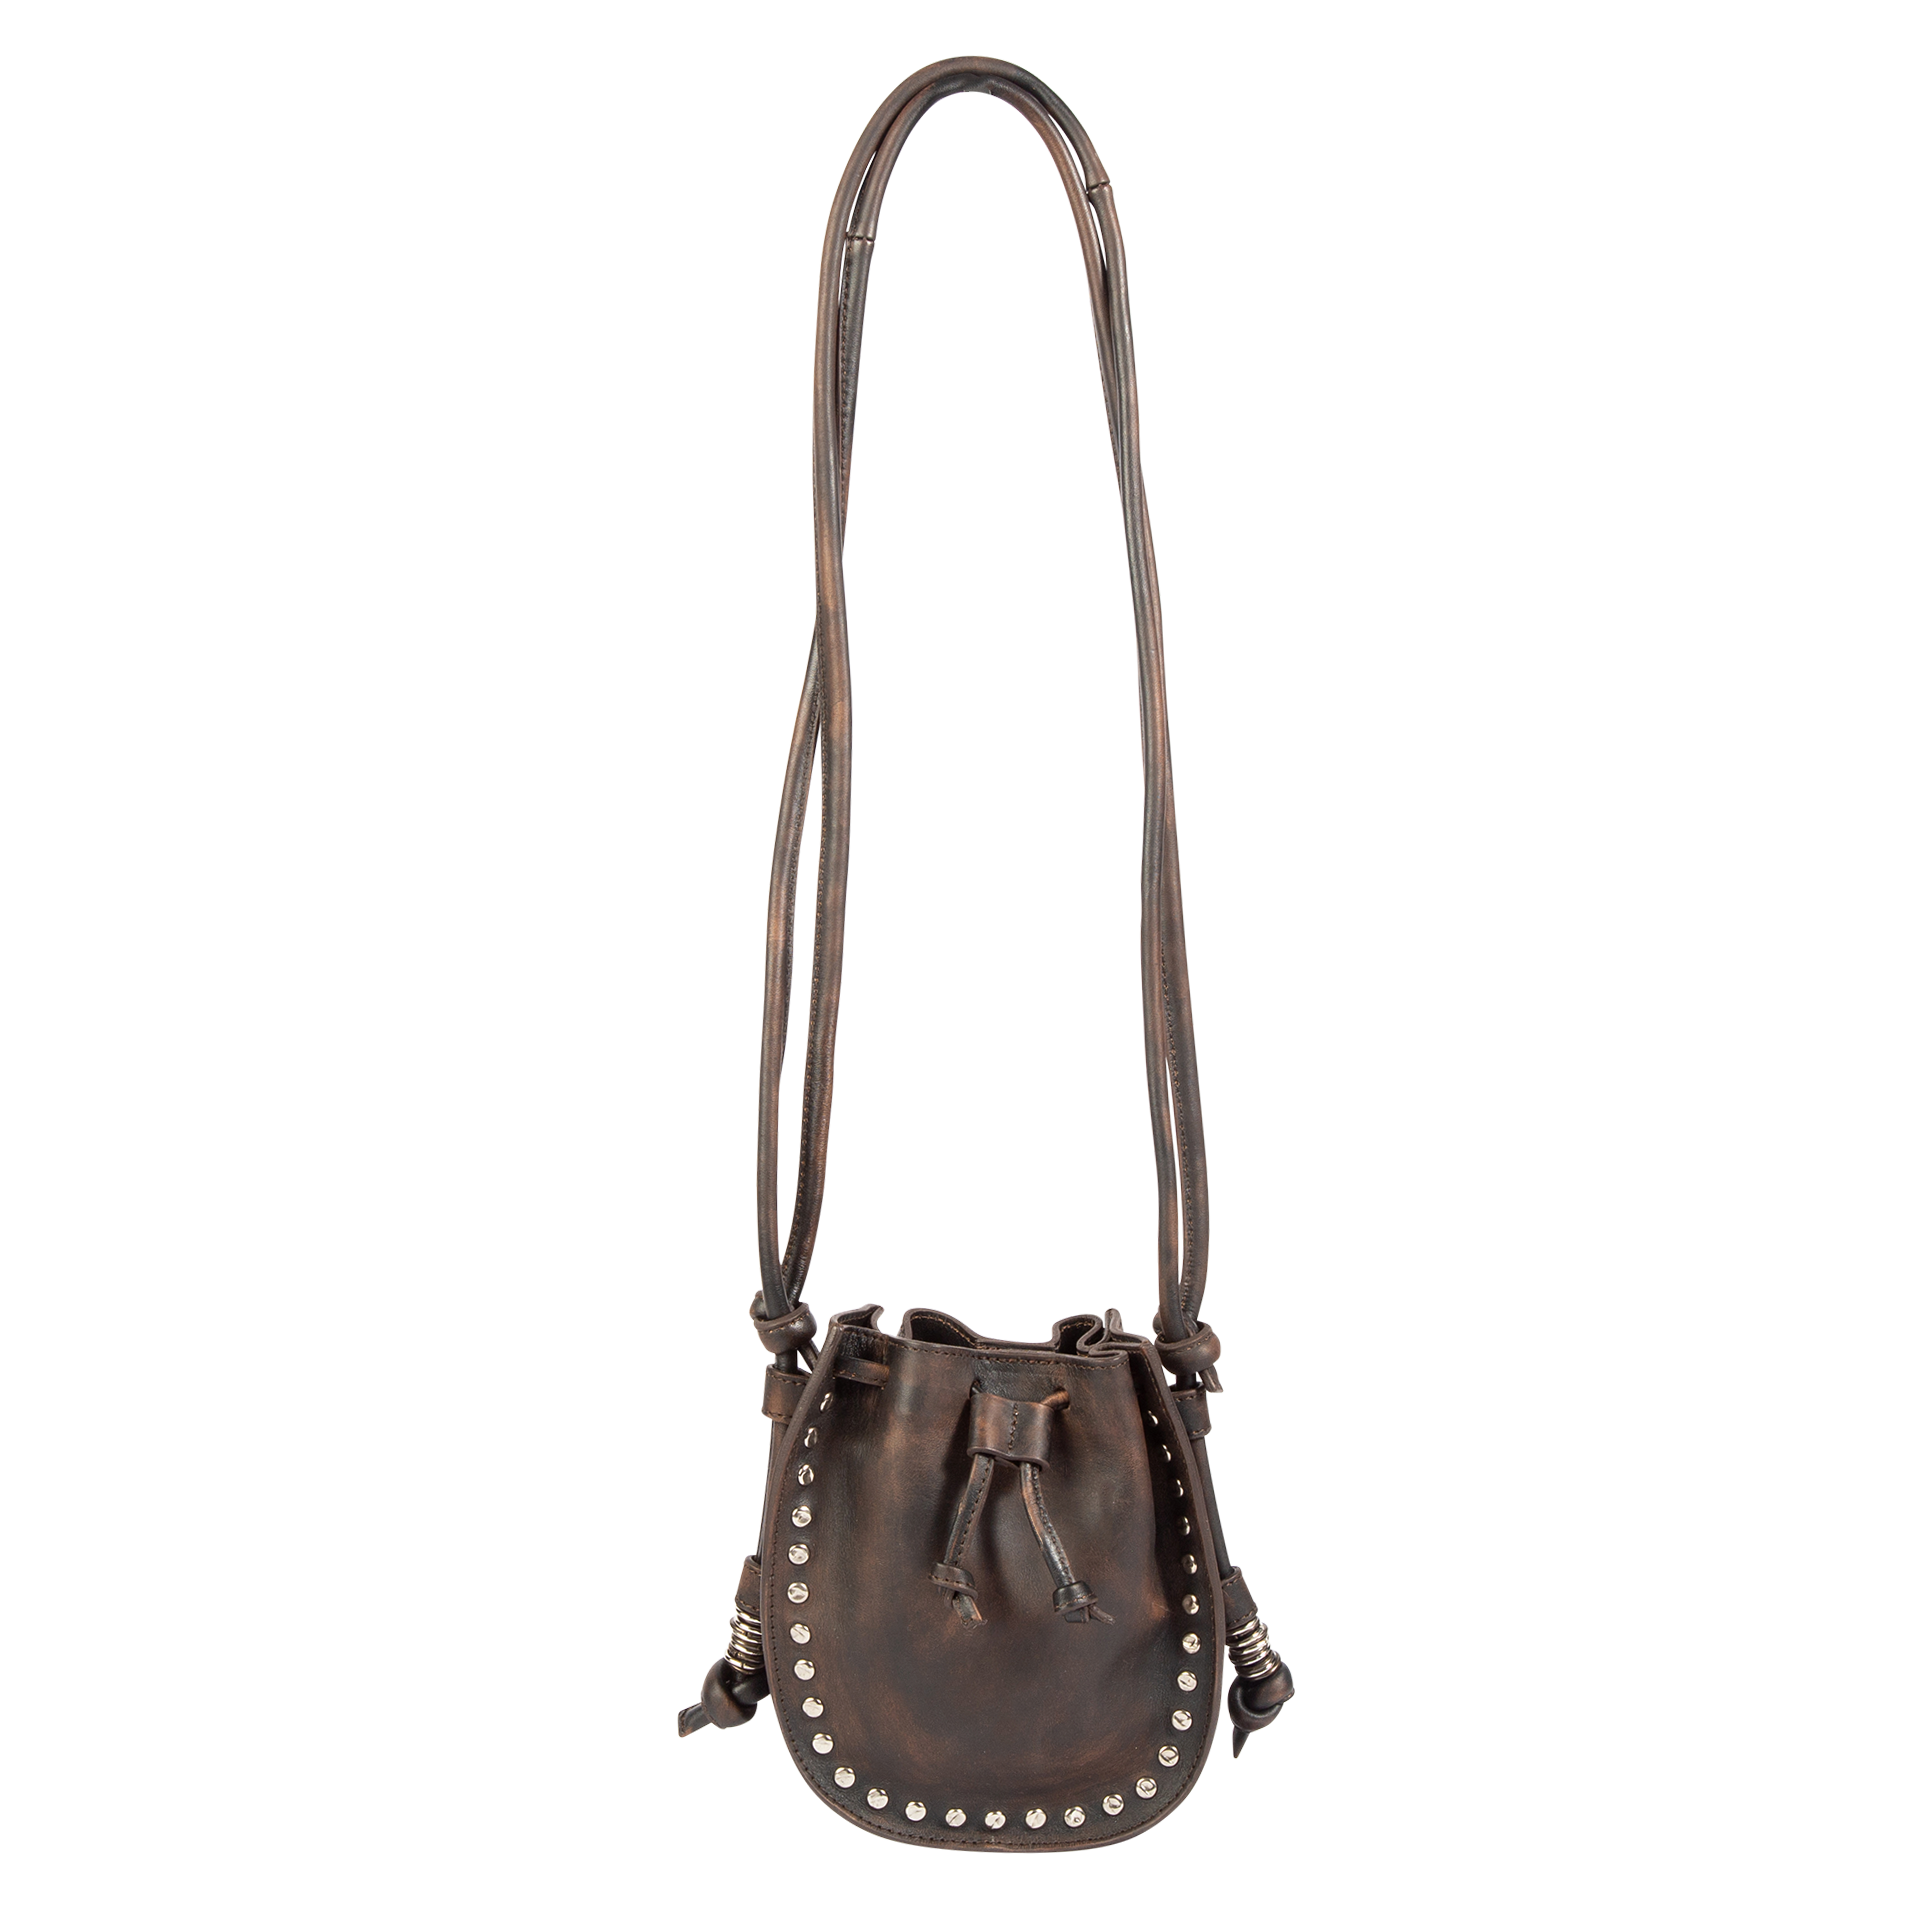 FREEBIRD Stella black distressed bag with silver clasp closure and adjustable leather shoulder straps